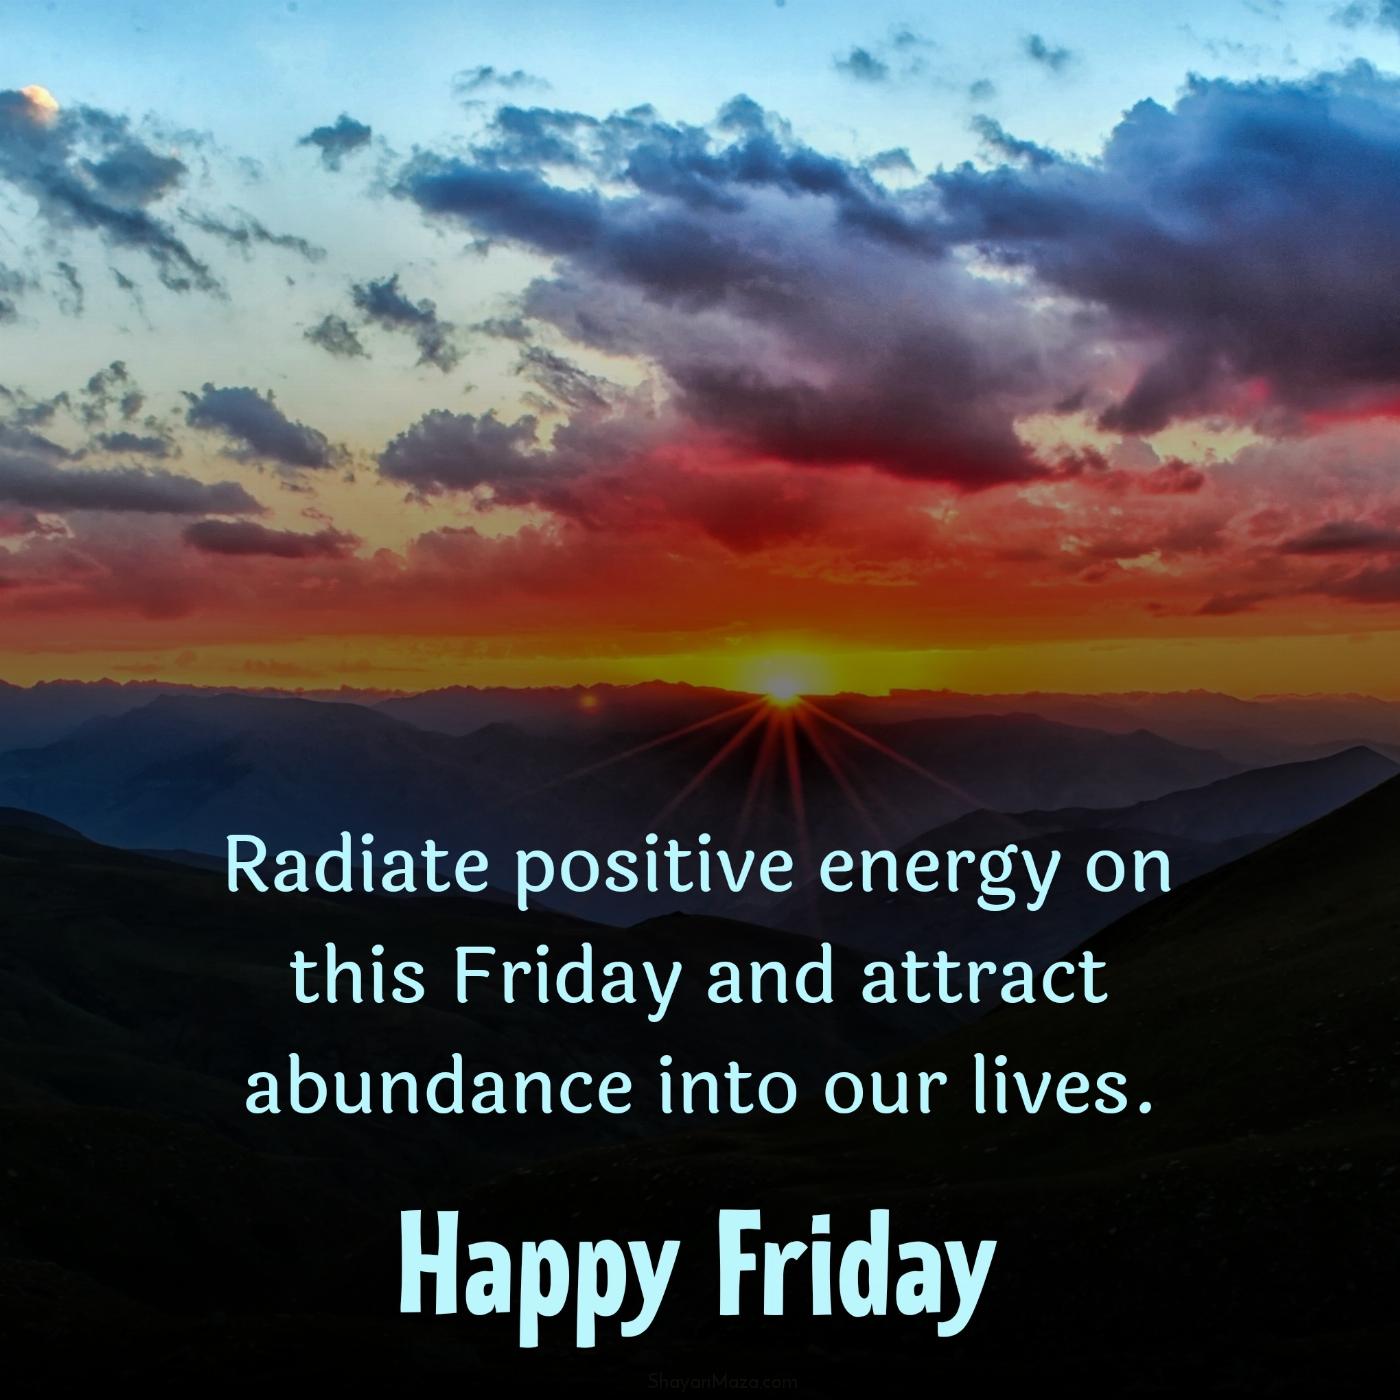 Radiate positive energy on this Friday and attract abundance